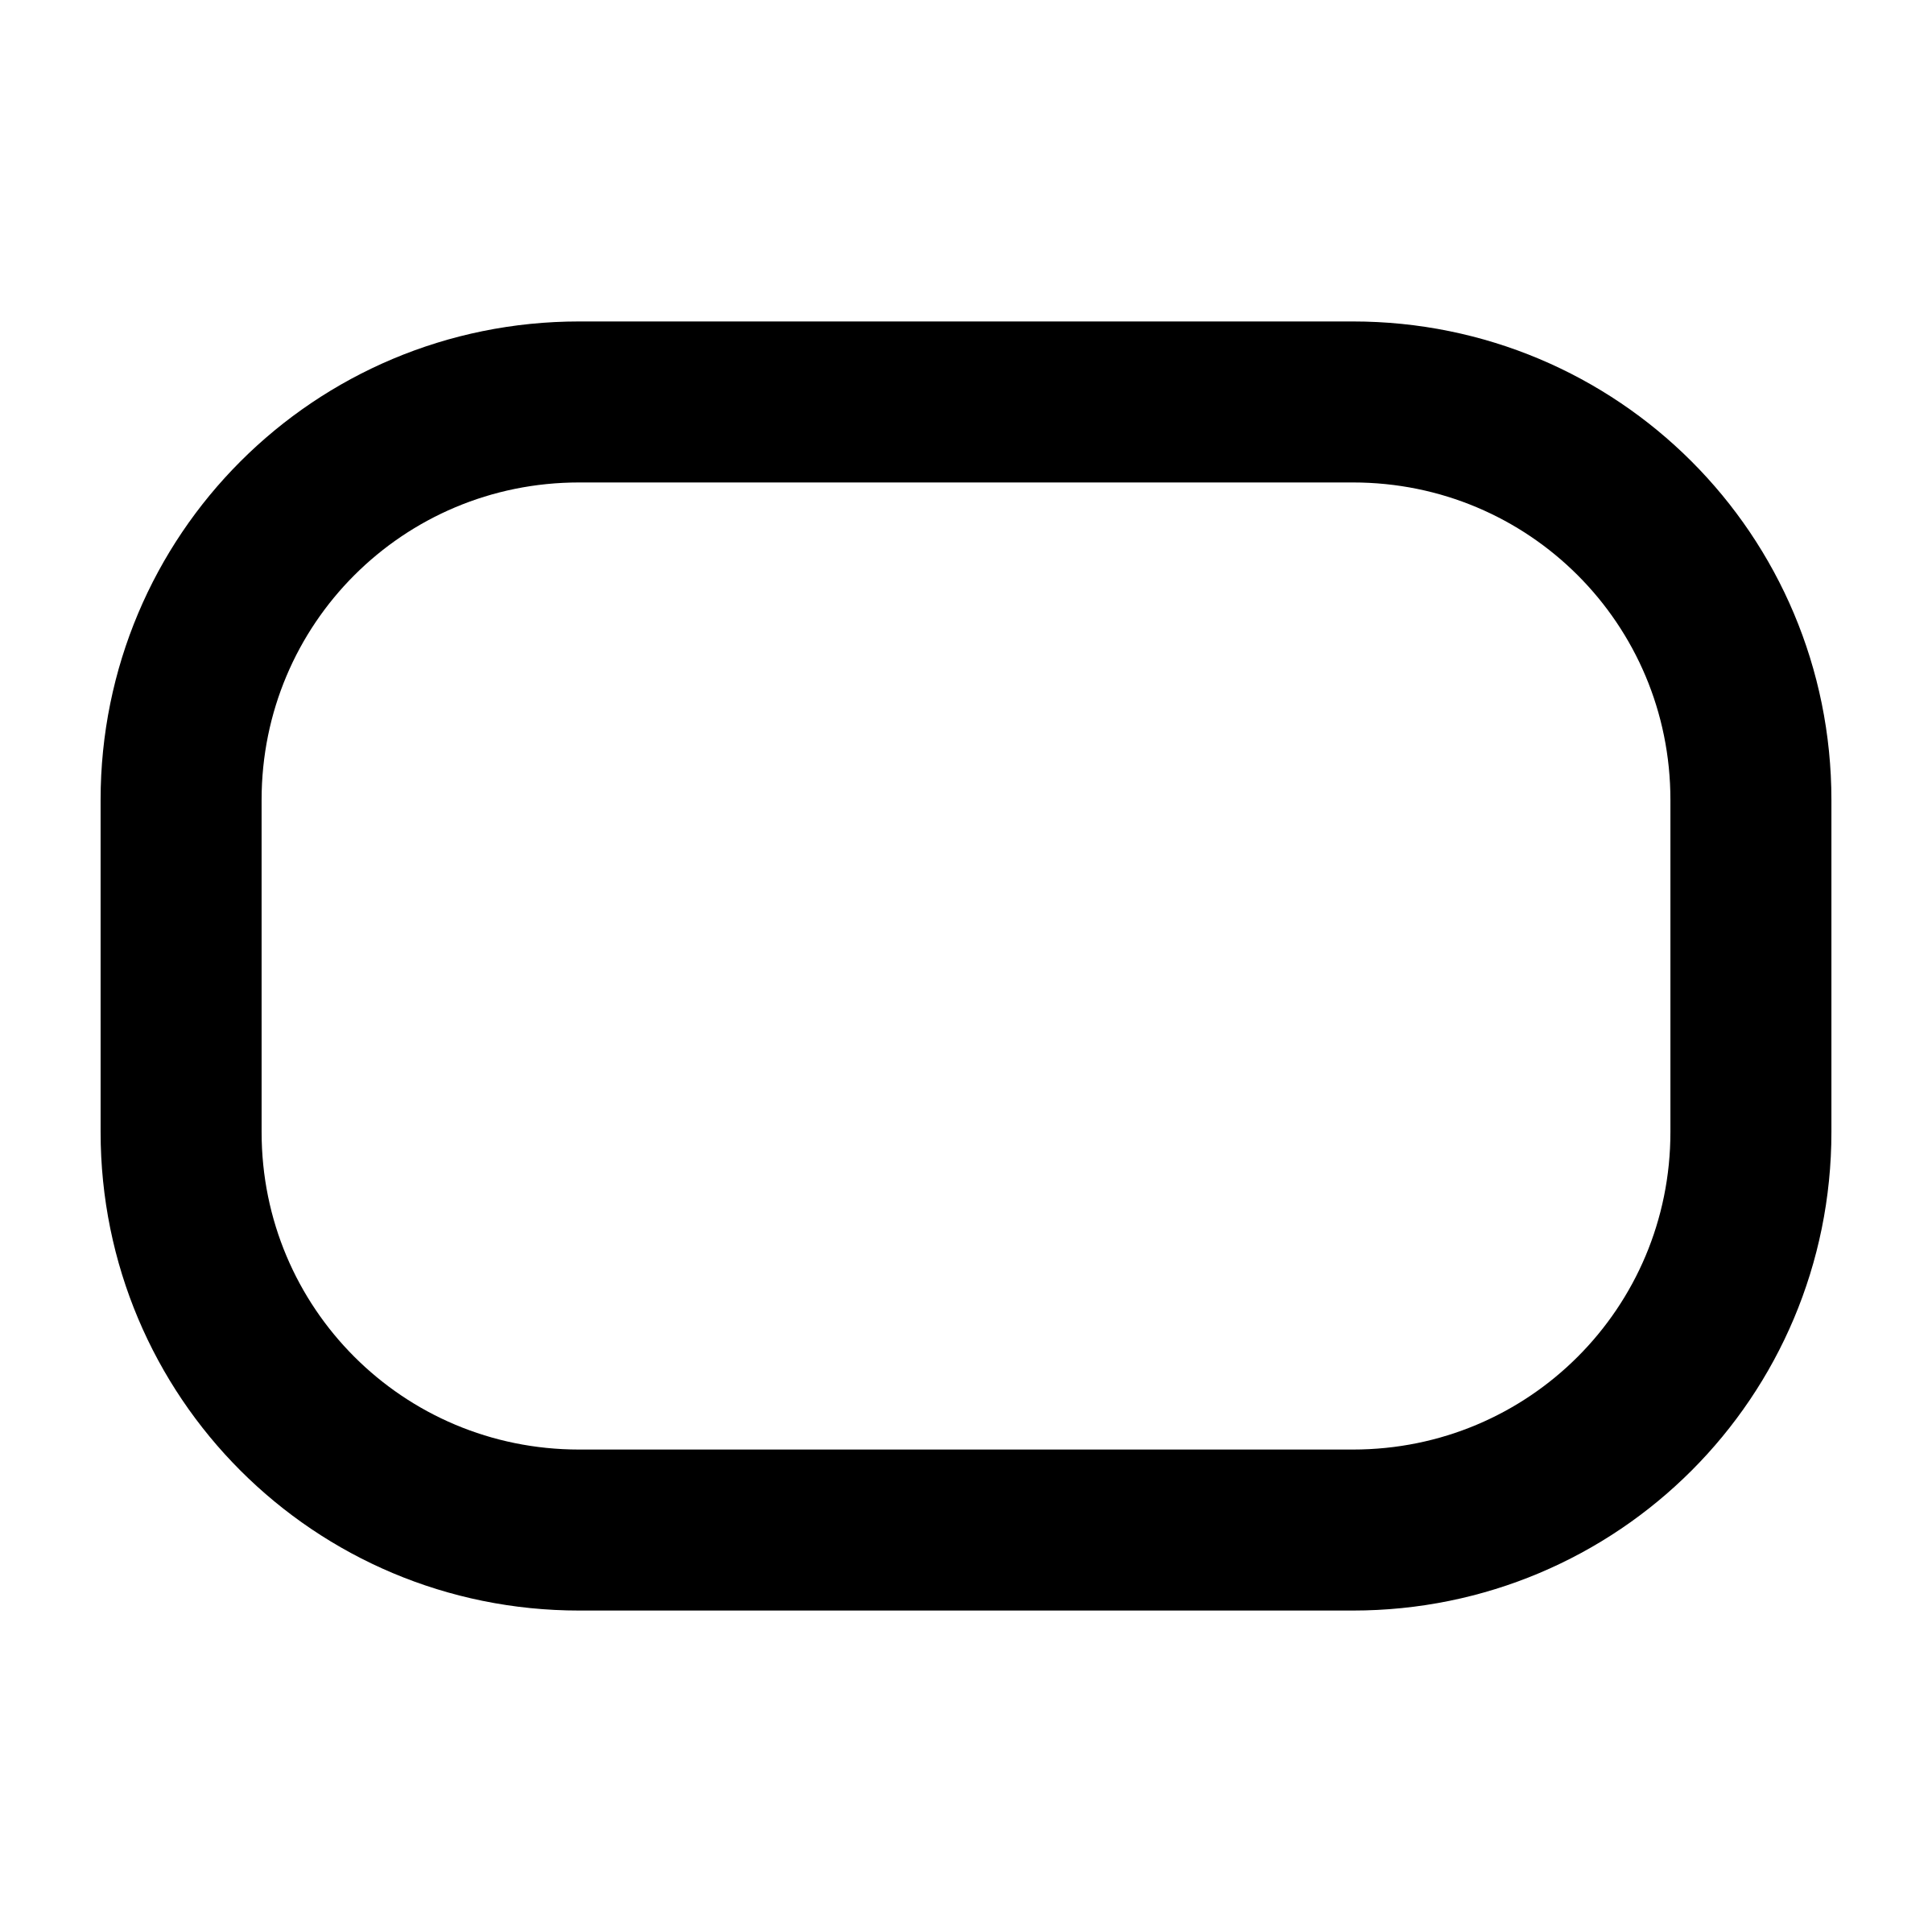 Rounded rectangle clip art 